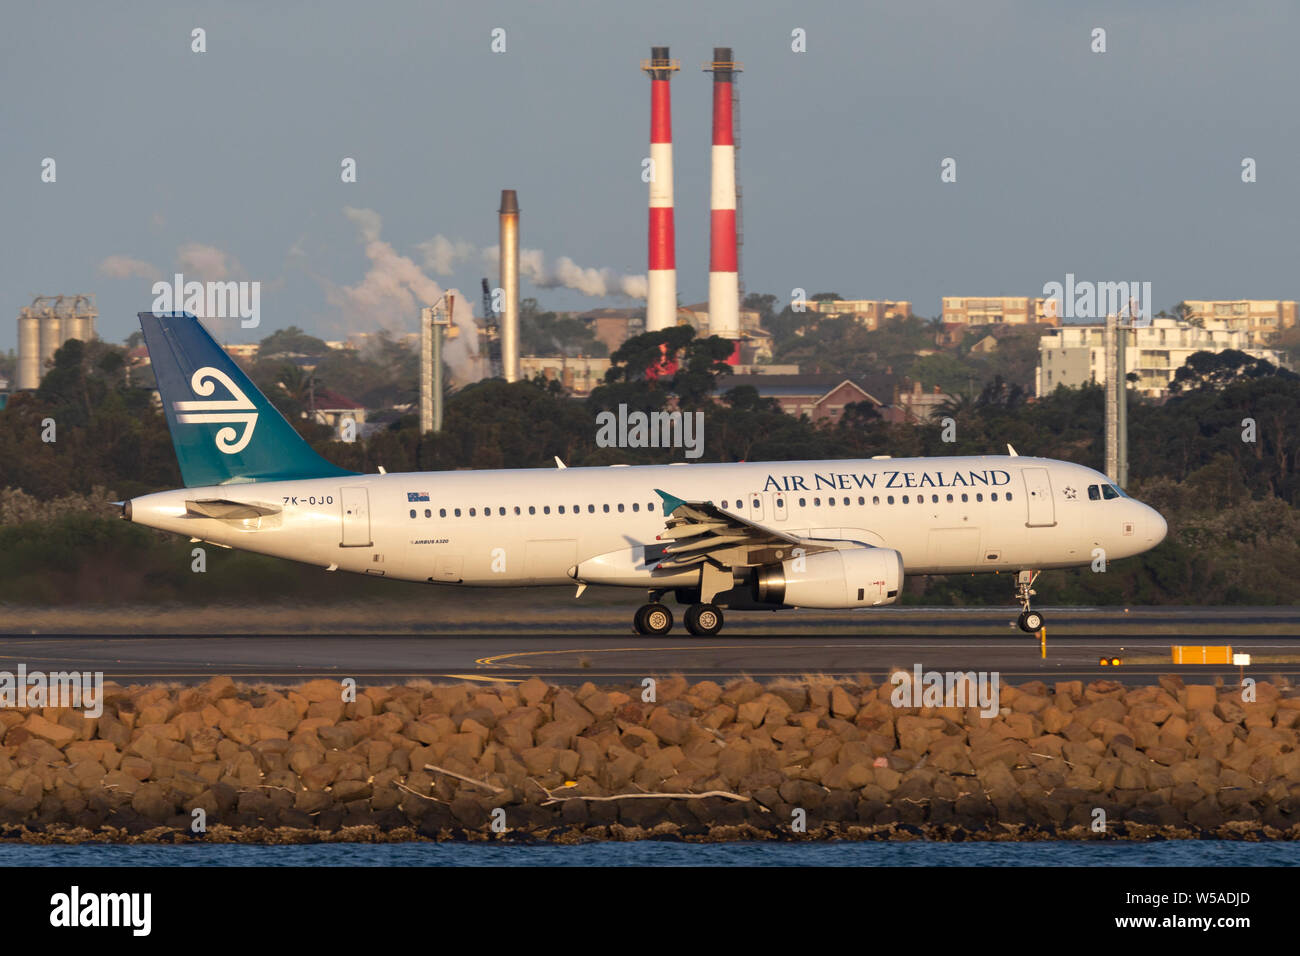 Air New Zealand Airbus A320 twin engined commercial airliner taking off from Sydney Airport. Stock Photo